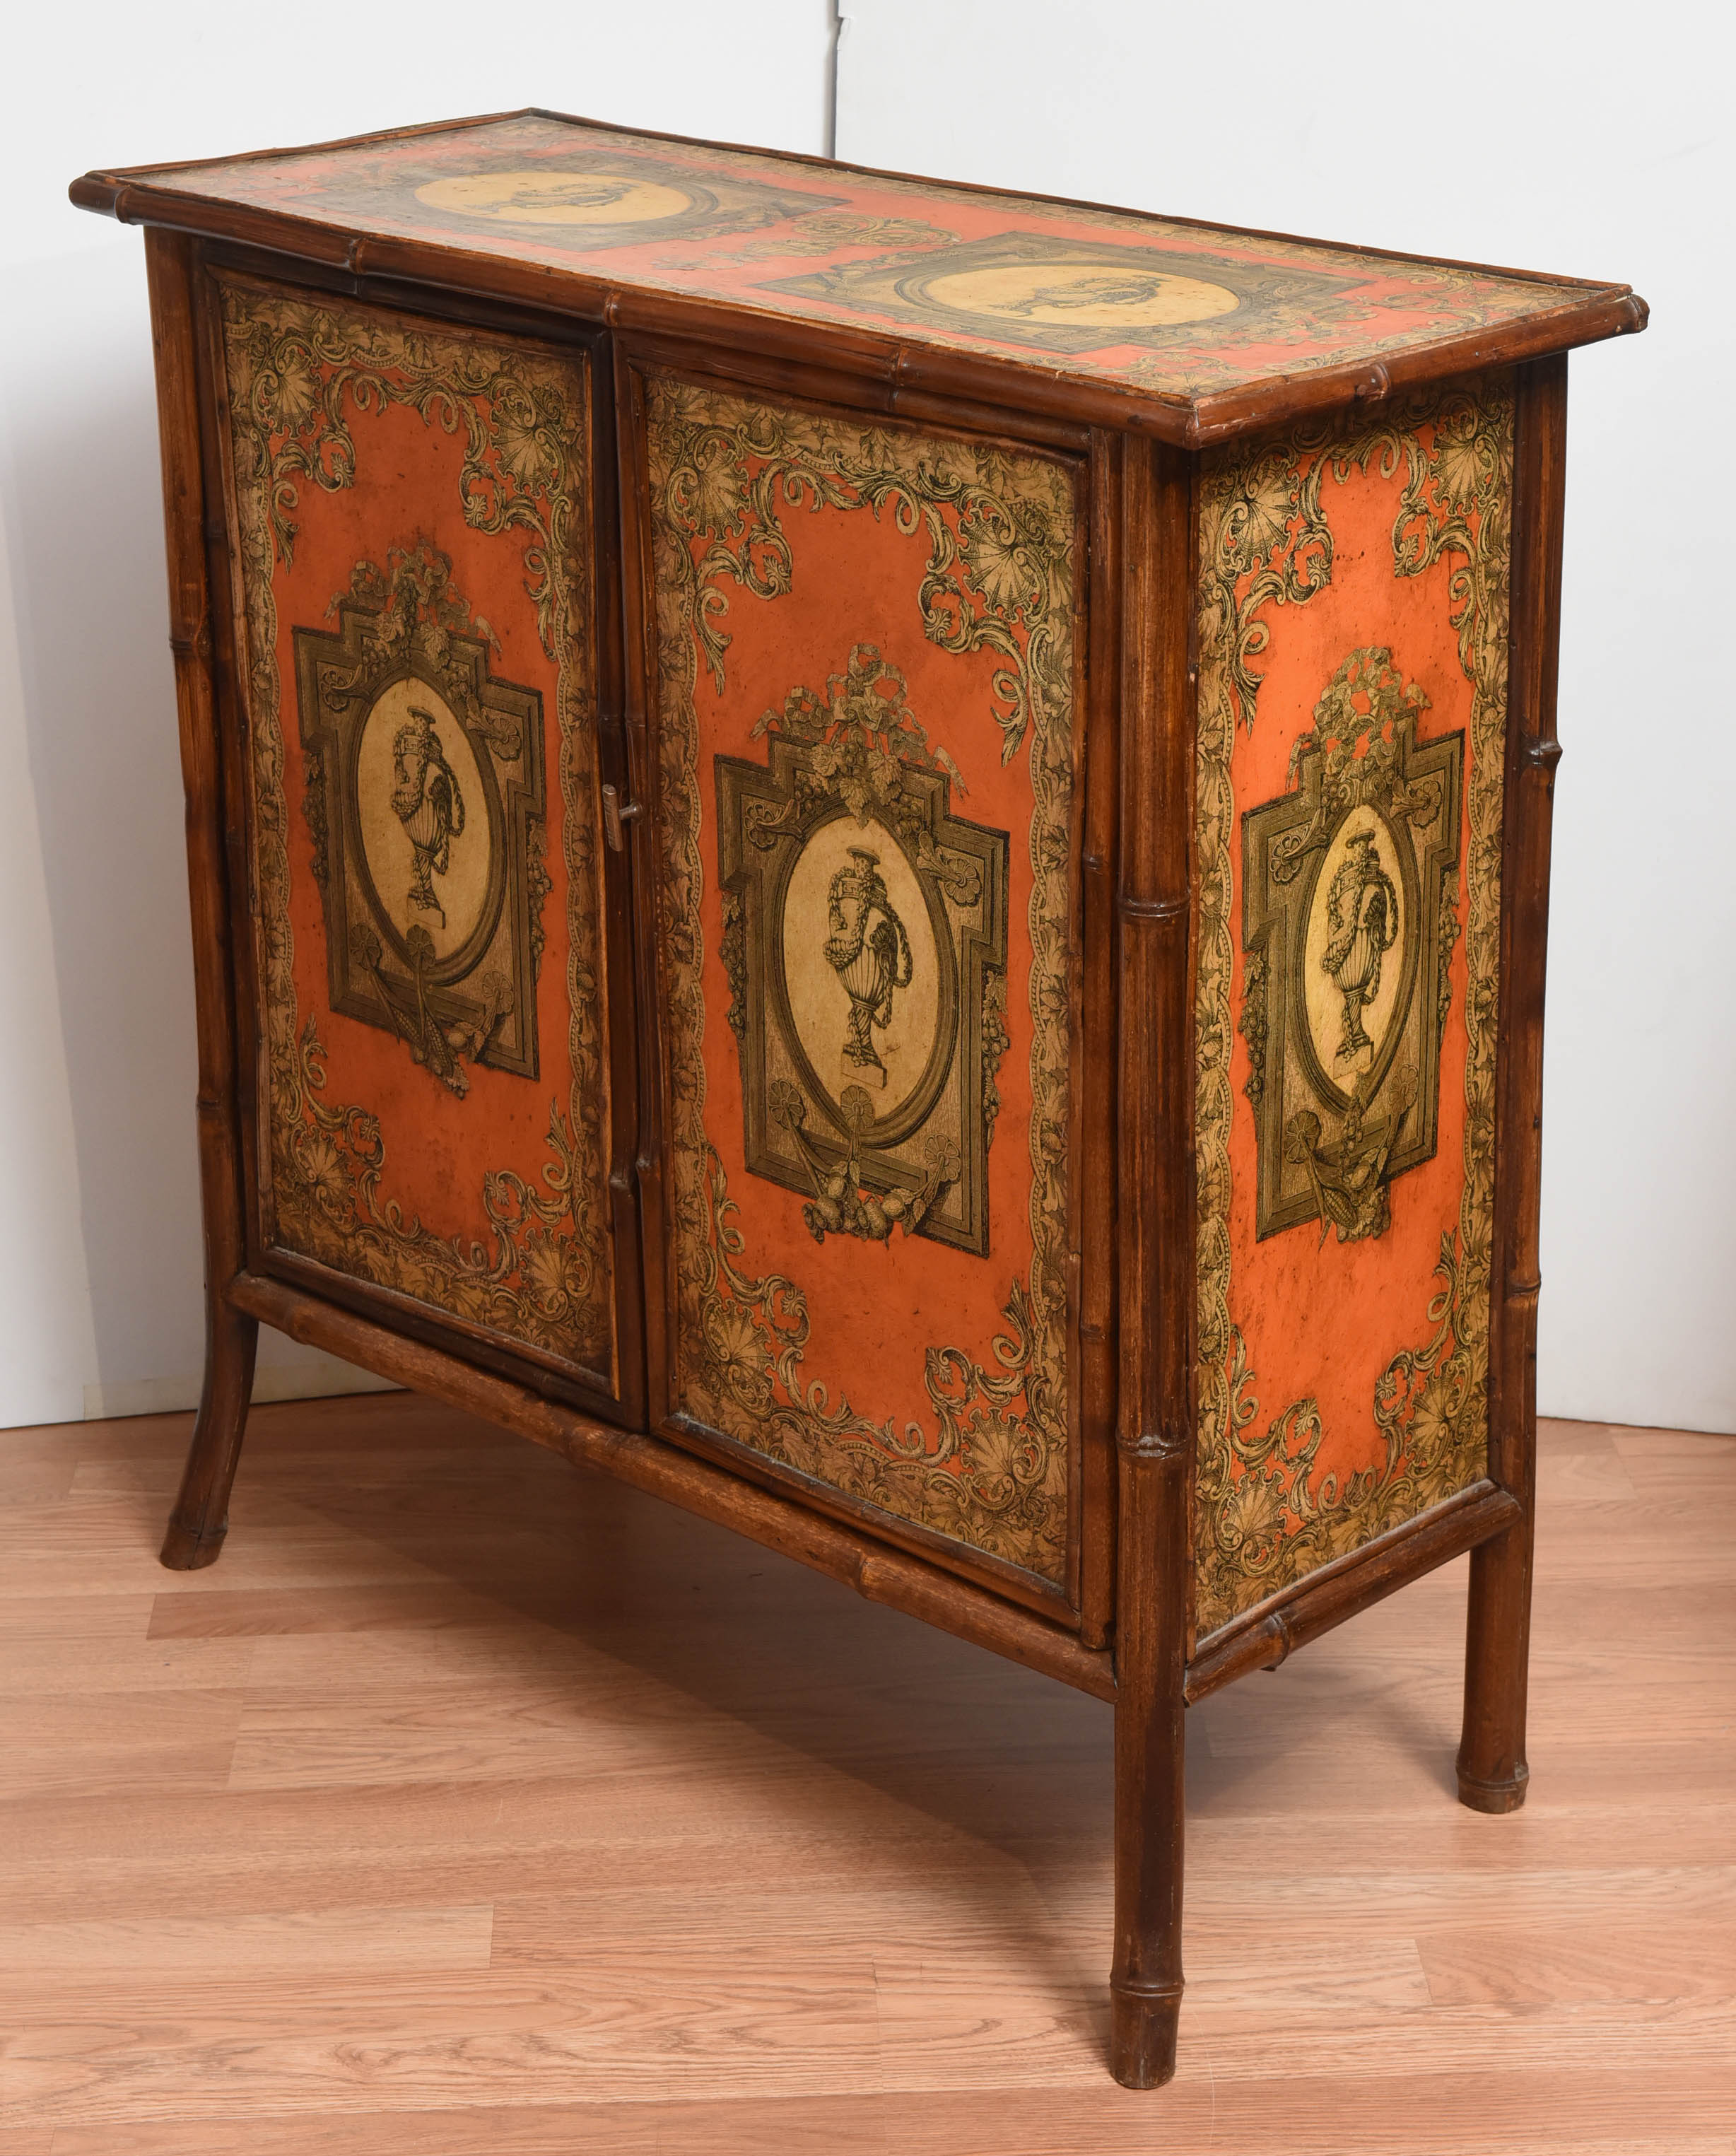 19th Century Antique Bamboo Cabinet with Decoupage Décor